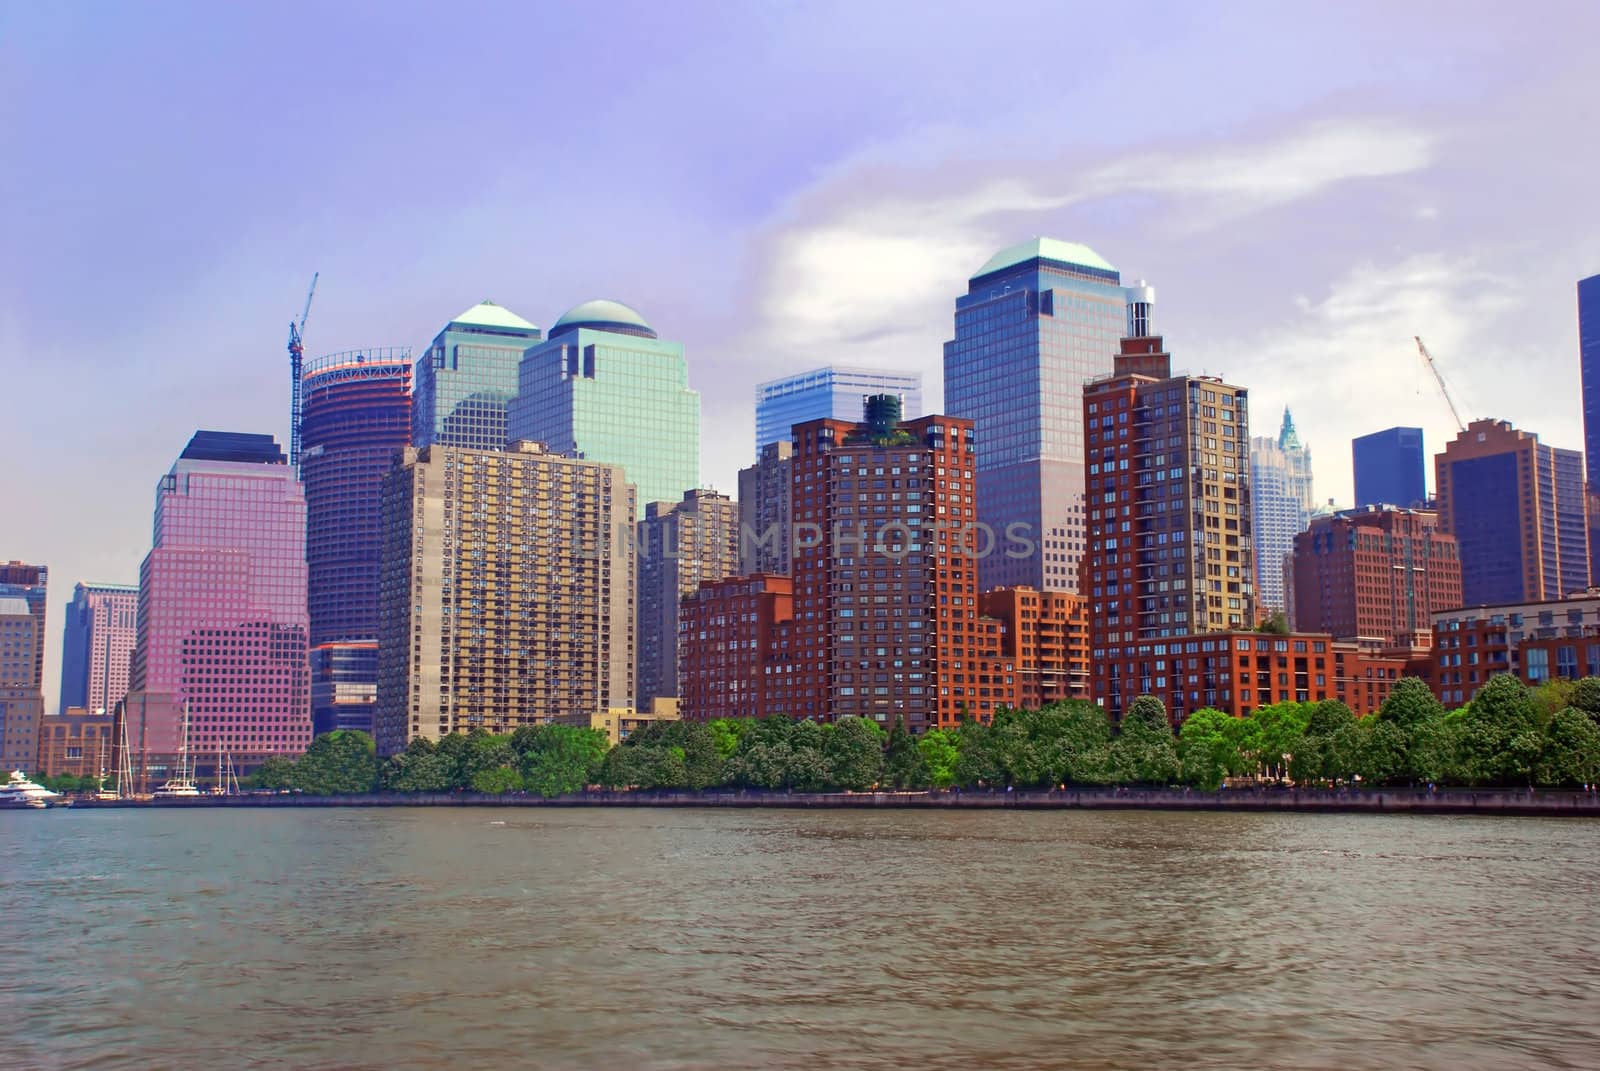 cityscape of New York City from river